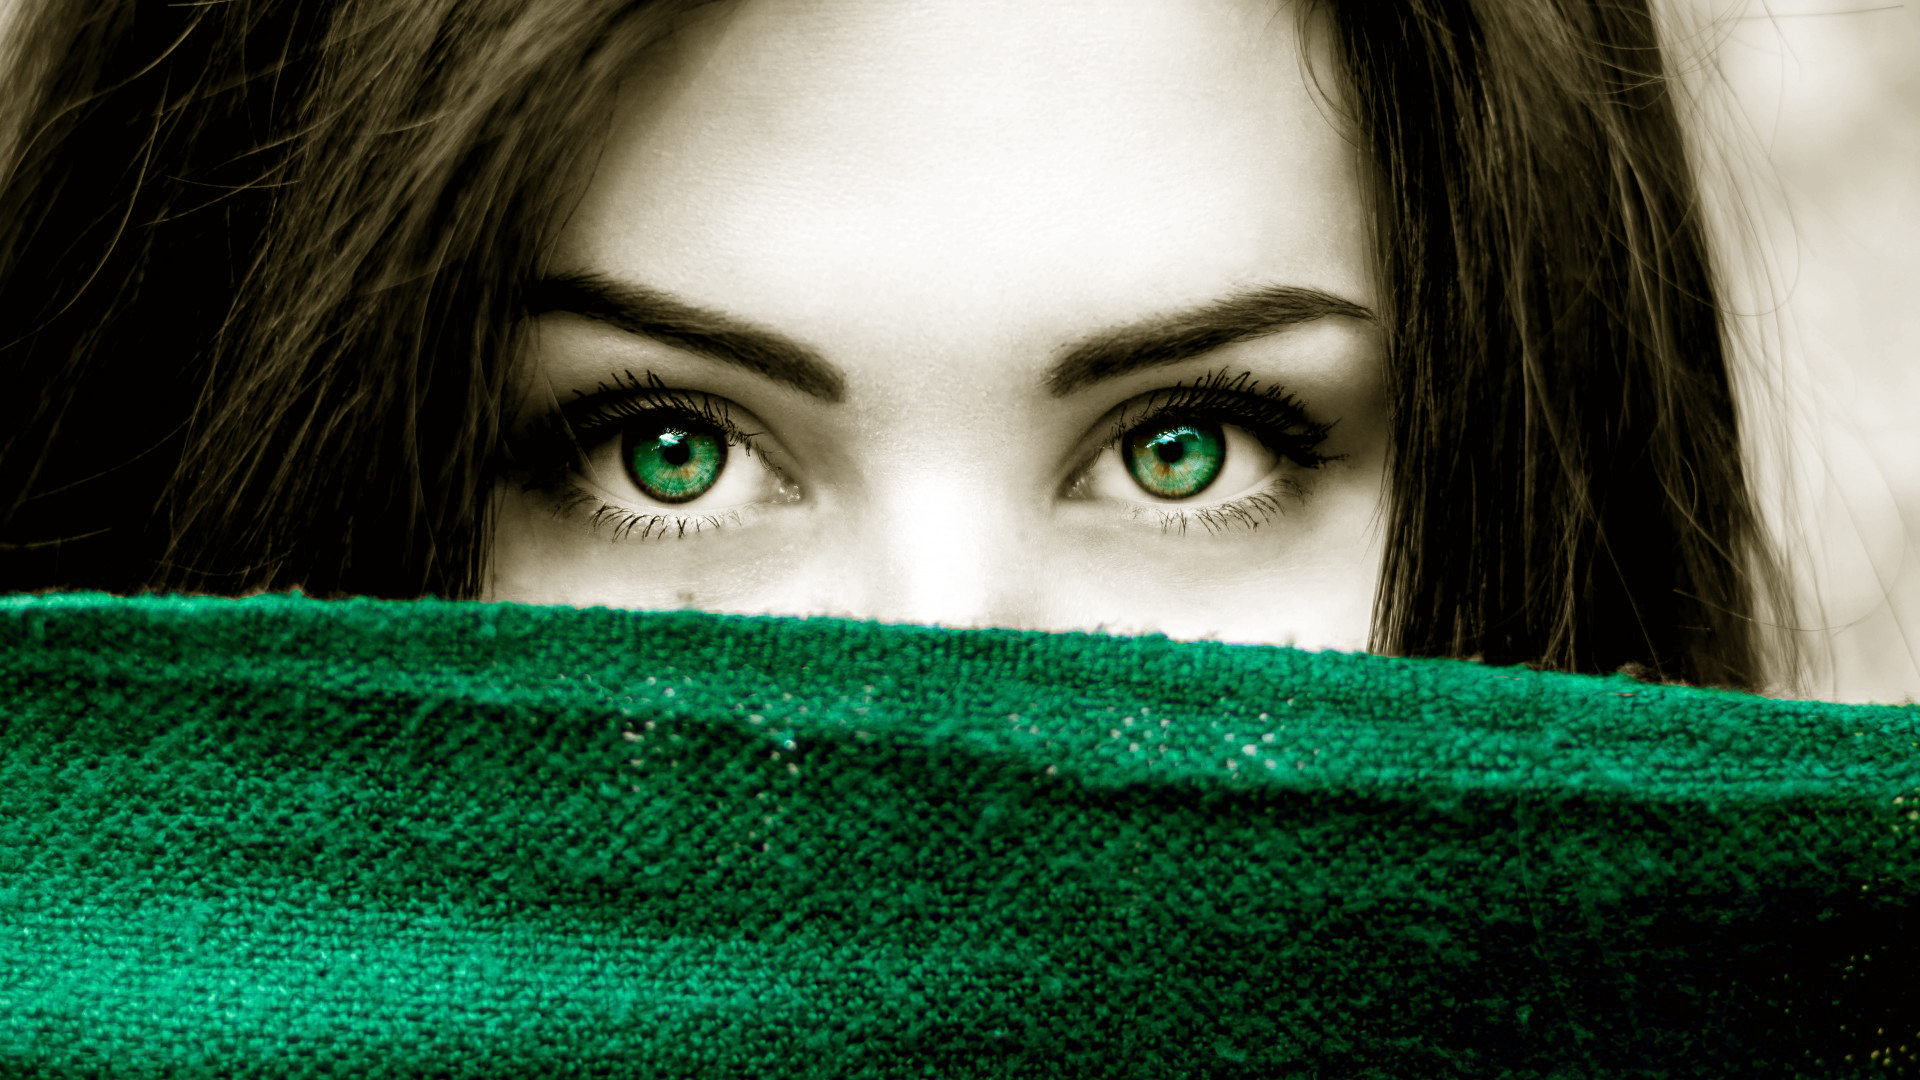 Beautiful Girl Close Up Photo with Green Eyes